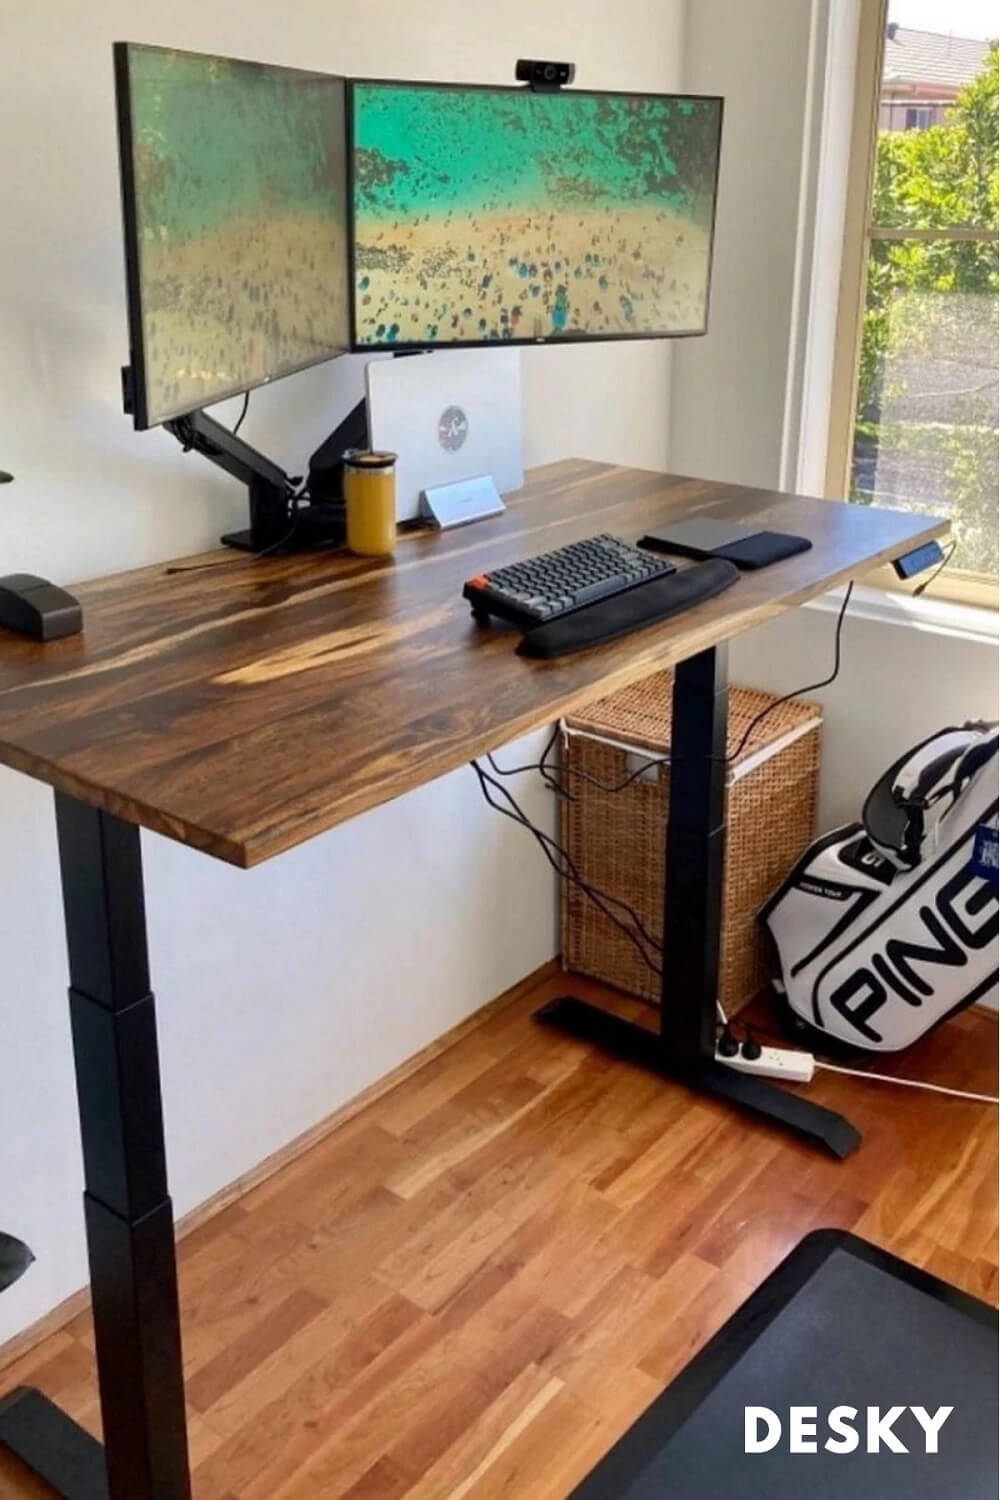 Sitting and standing option while working using a sit stand desk